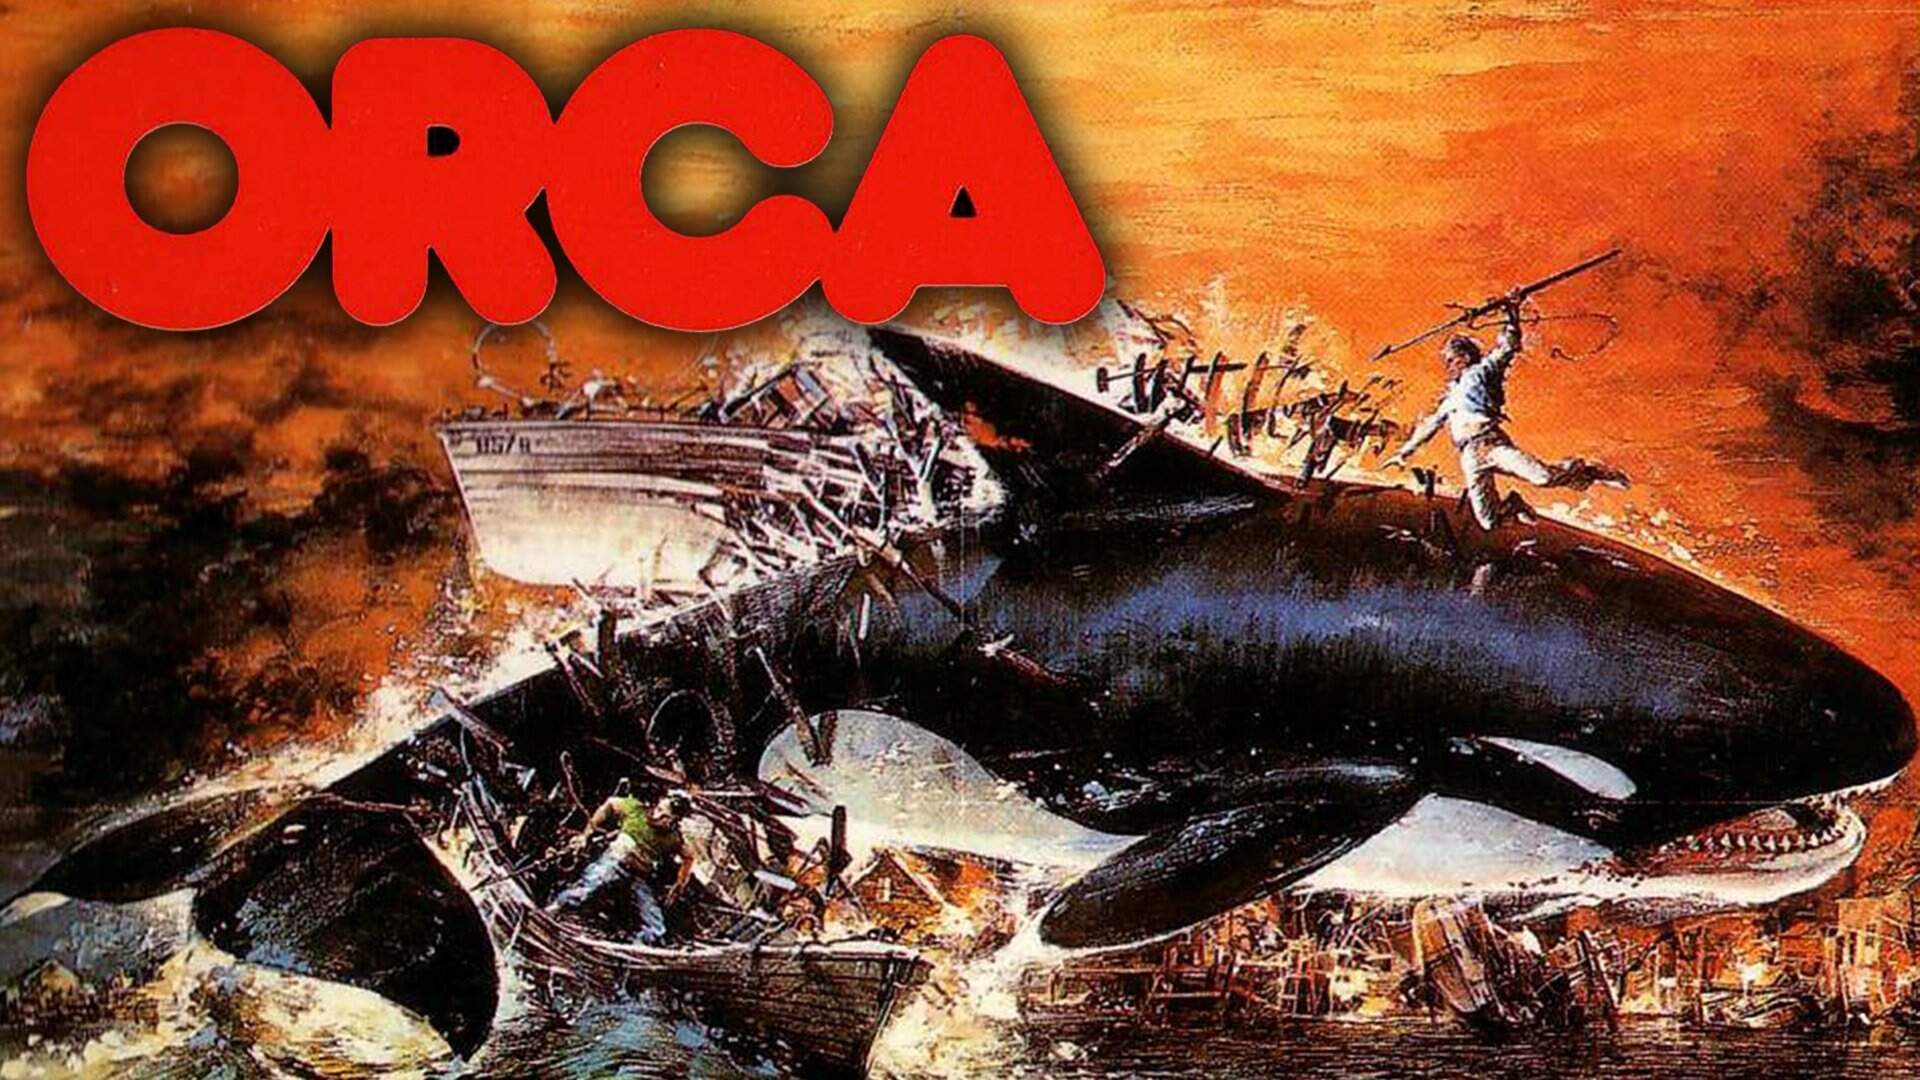 46-facts-about-the-movie-orca